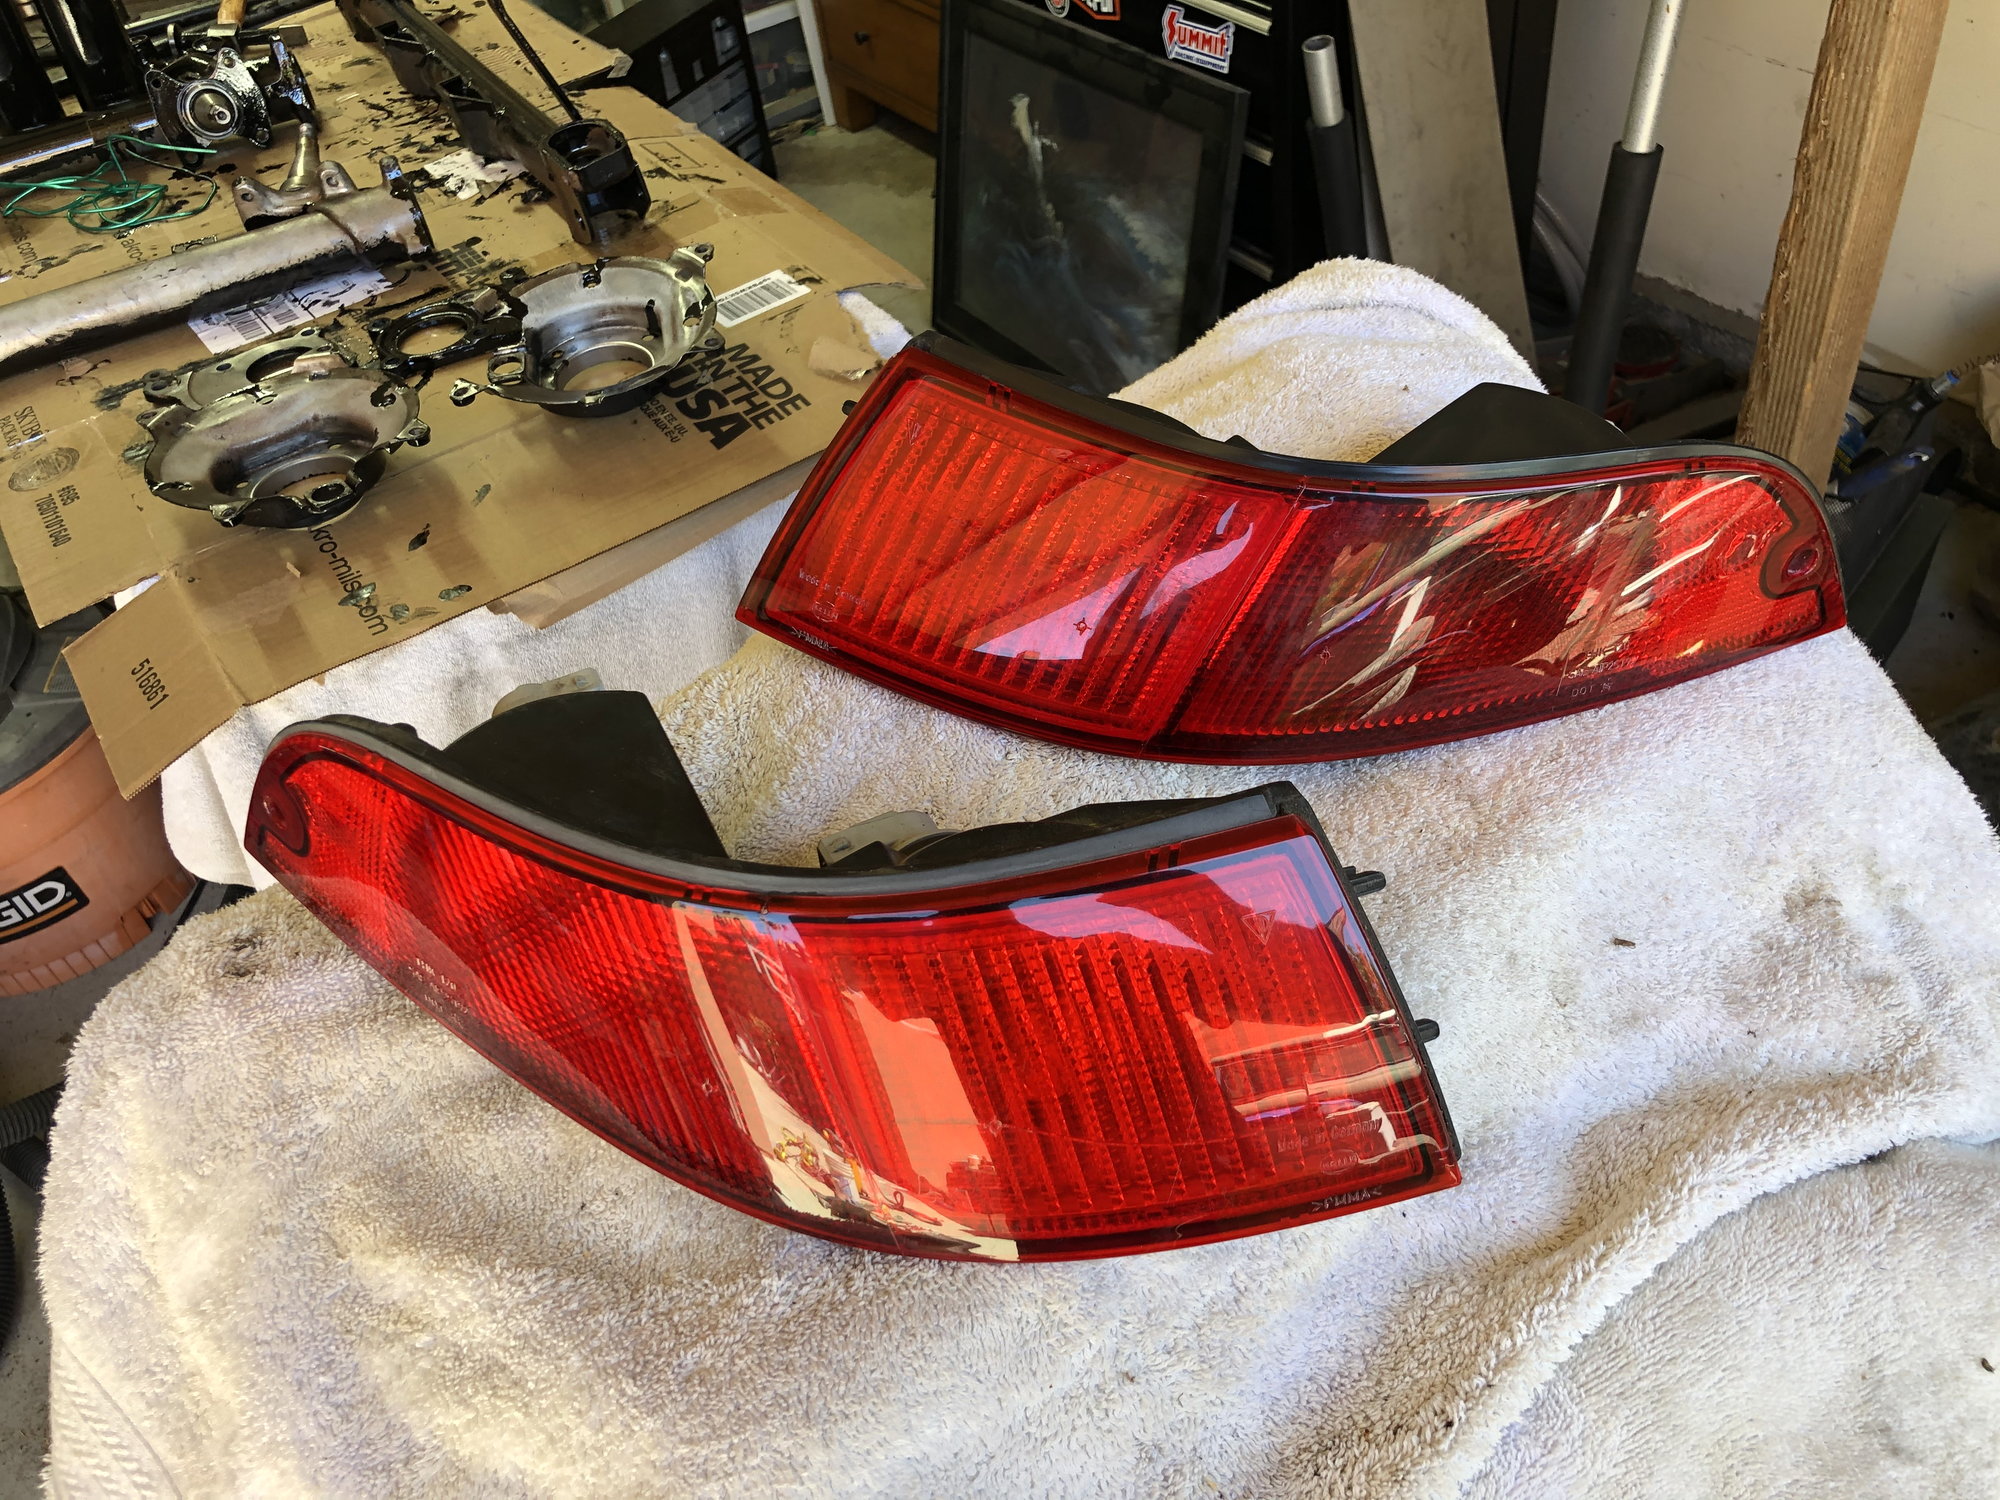 Lights - 993 tail lights - Used - 1995 to 1998 Porsche 911 - Agua Dulce, CA 91390, United States